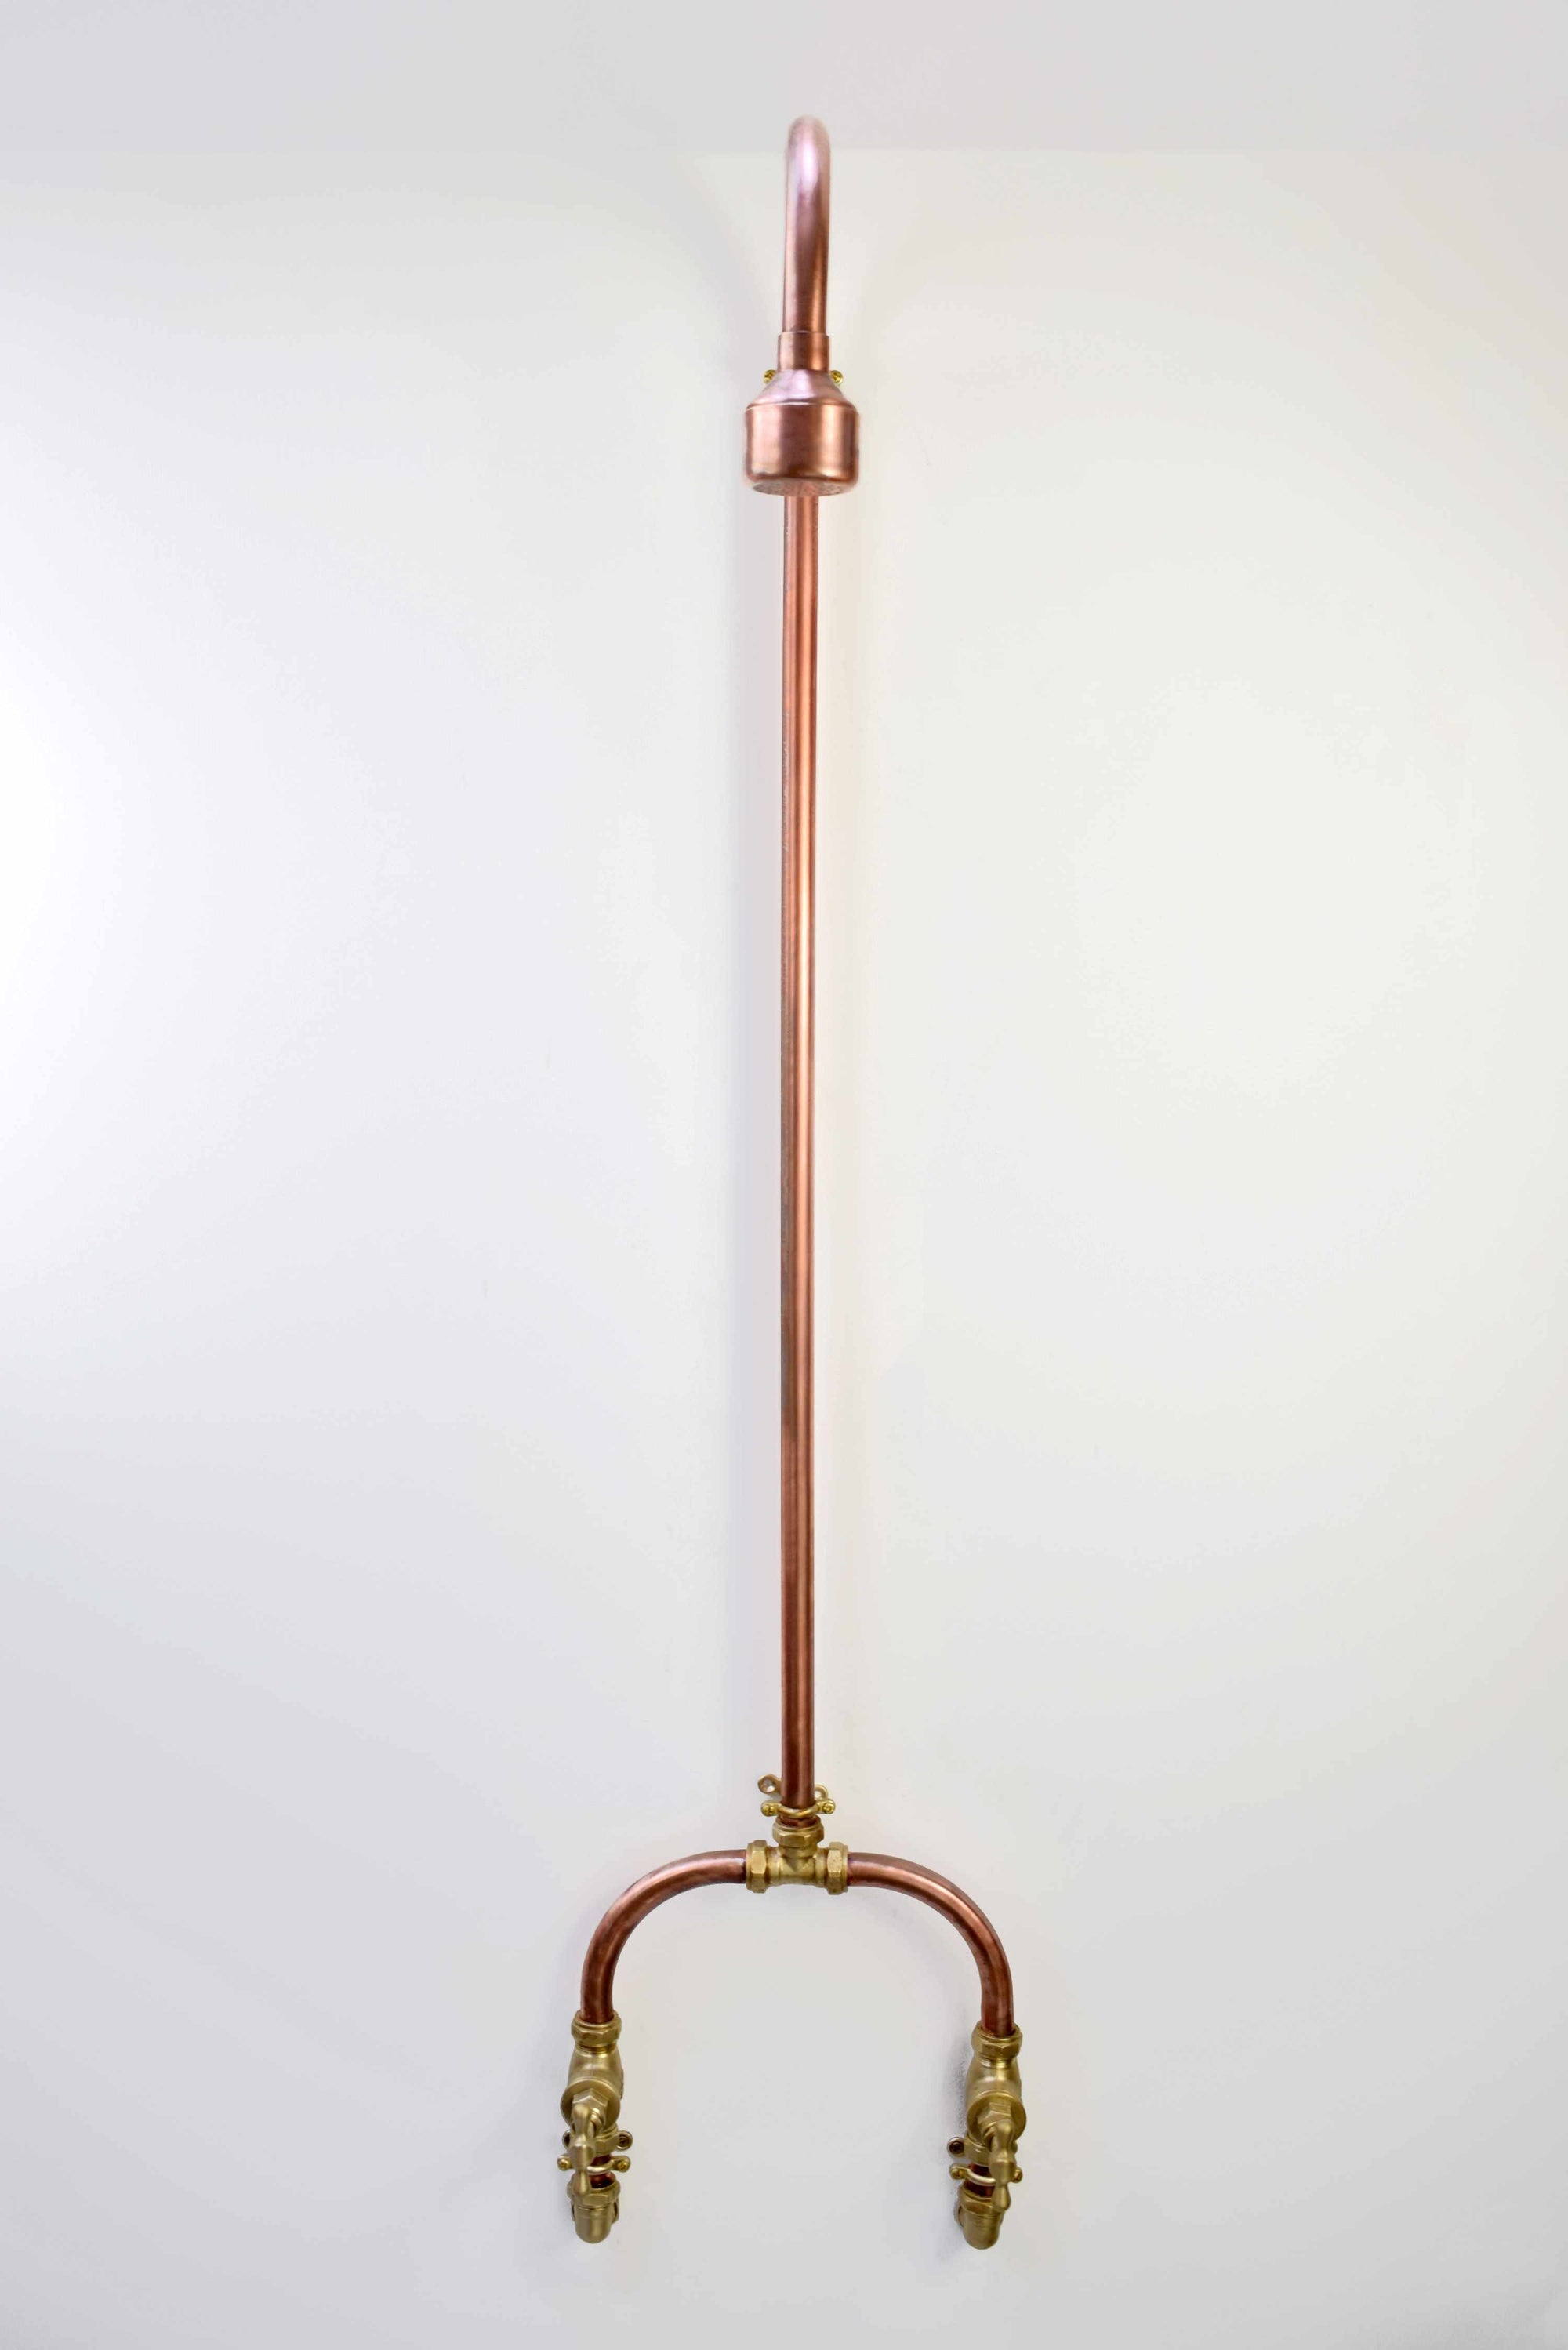 Curved copper shower with brass taps uk